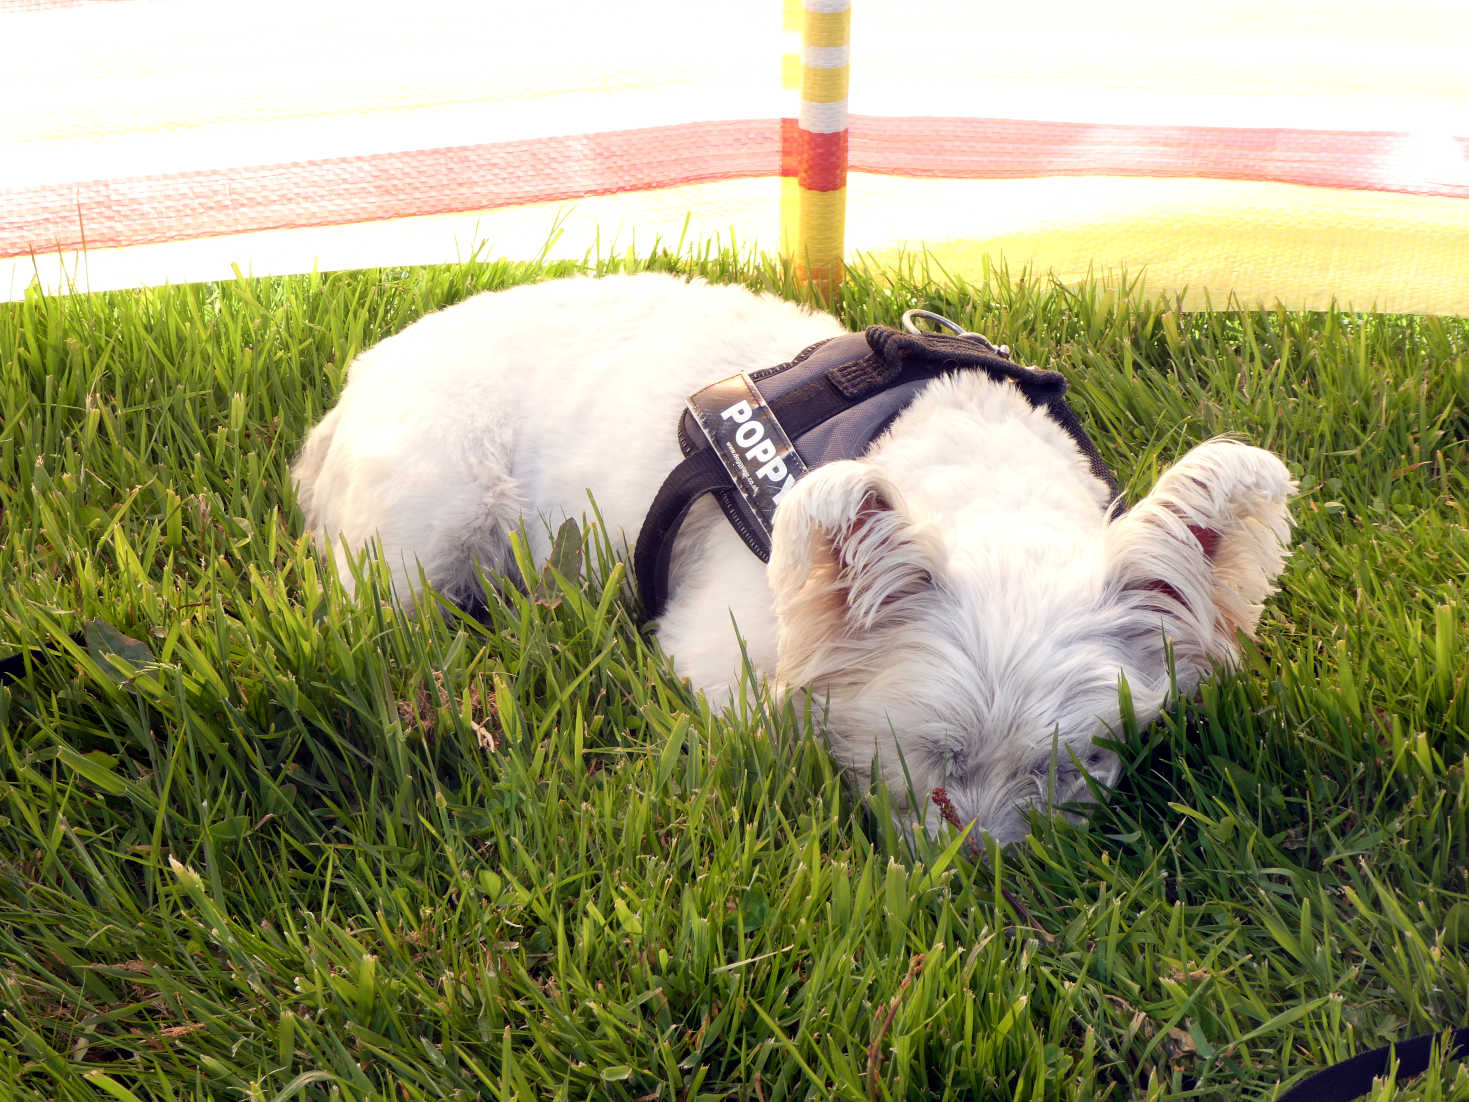 Poppy the Westie snoozing in the spongy grass